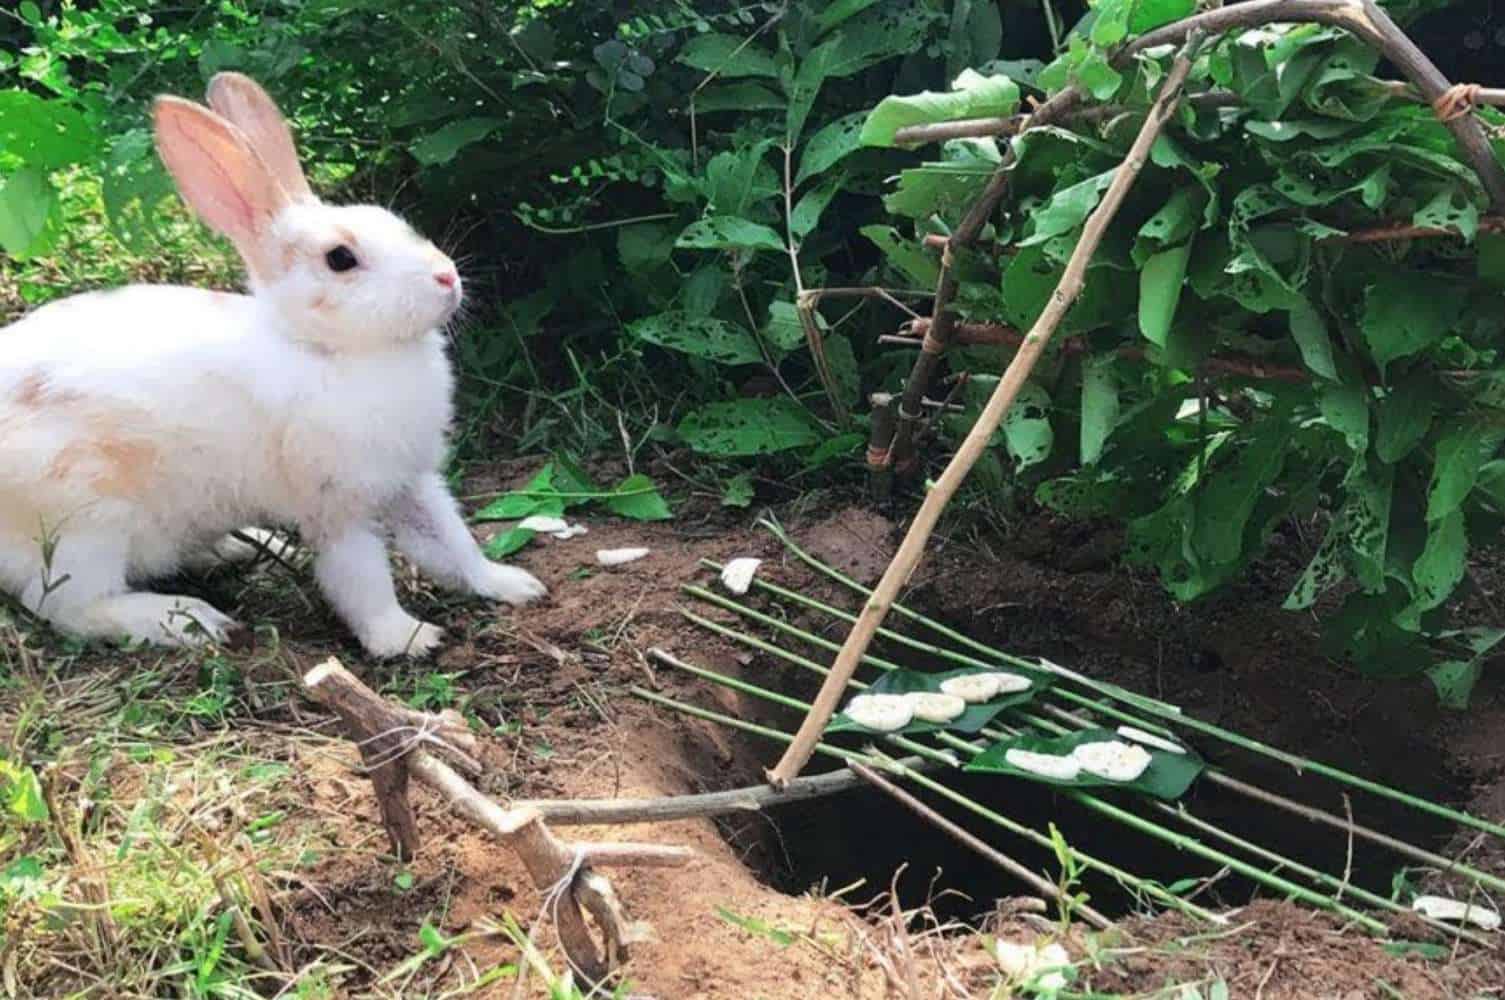 How To Trap Rabbits In Garden 3 Proven Ways to Trap Rabbits